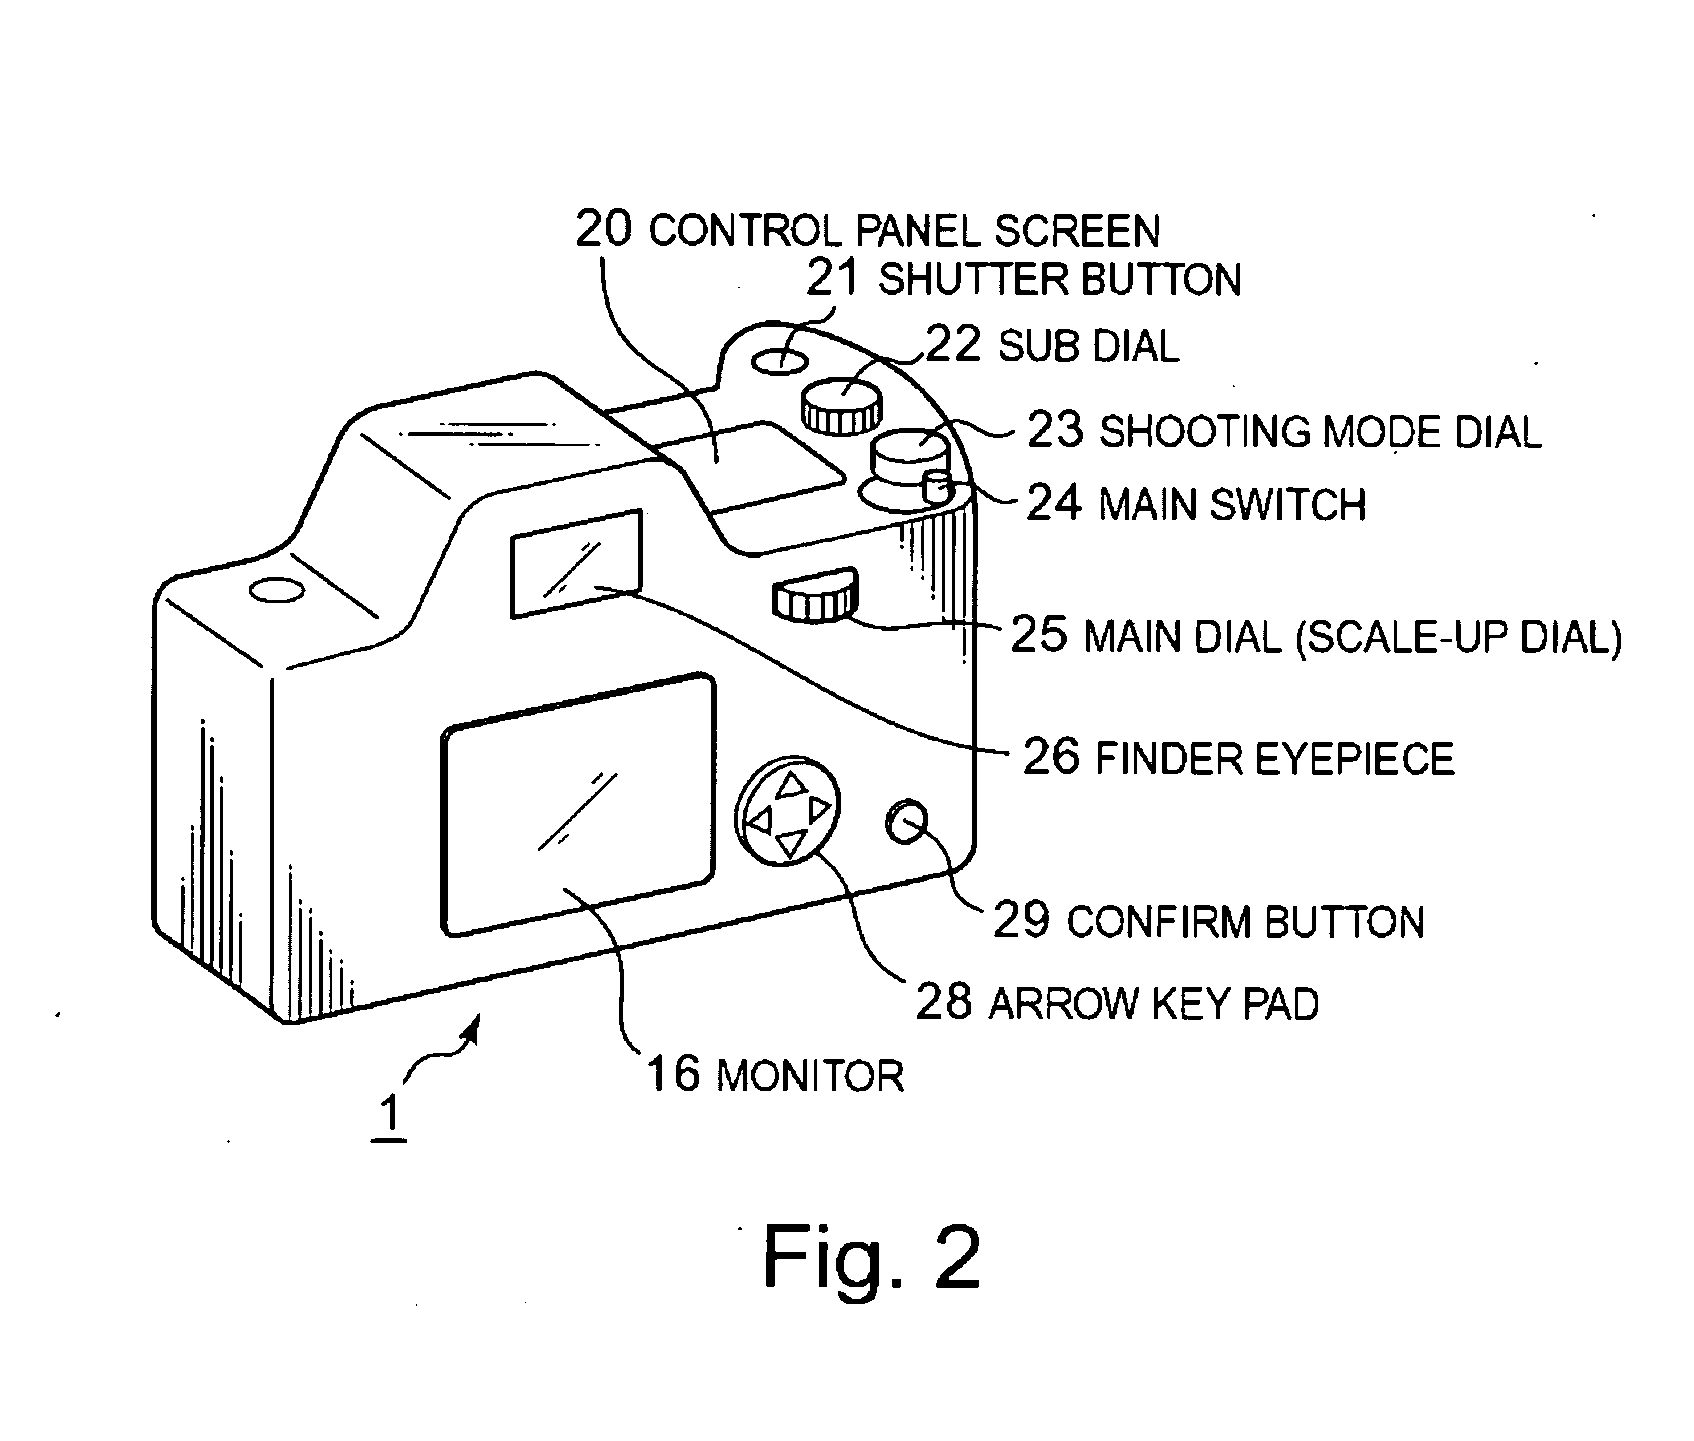 Digital camera capable of continuous shooting and control method for the digital camera